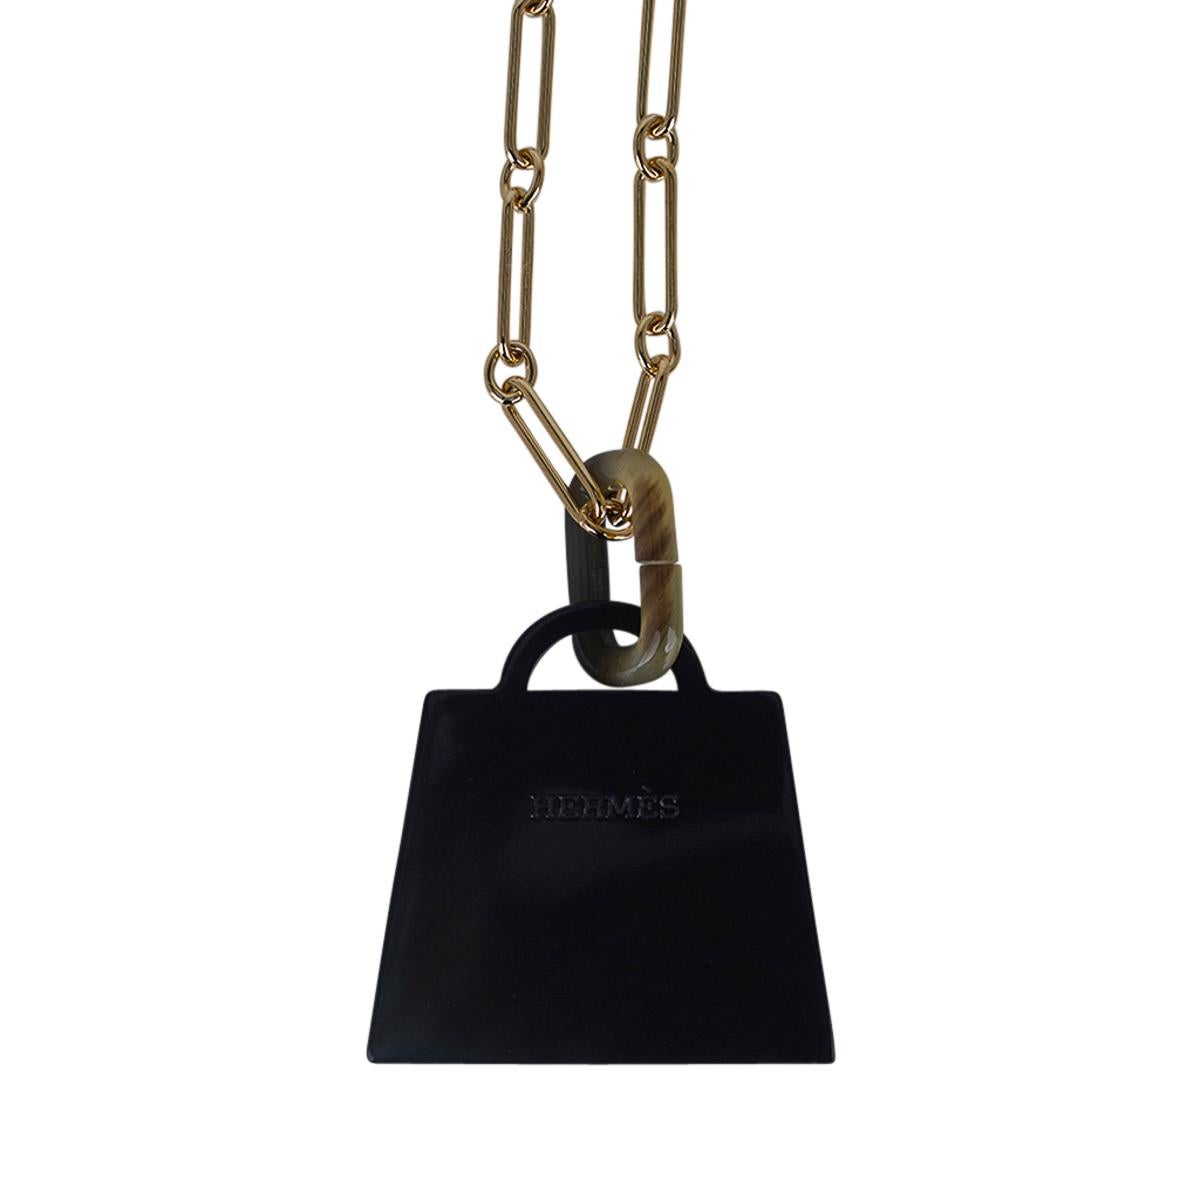 Hermes Fusion Amulette Kelly Pendentif By the Sea Collier Permabrass Hardware en vente 1